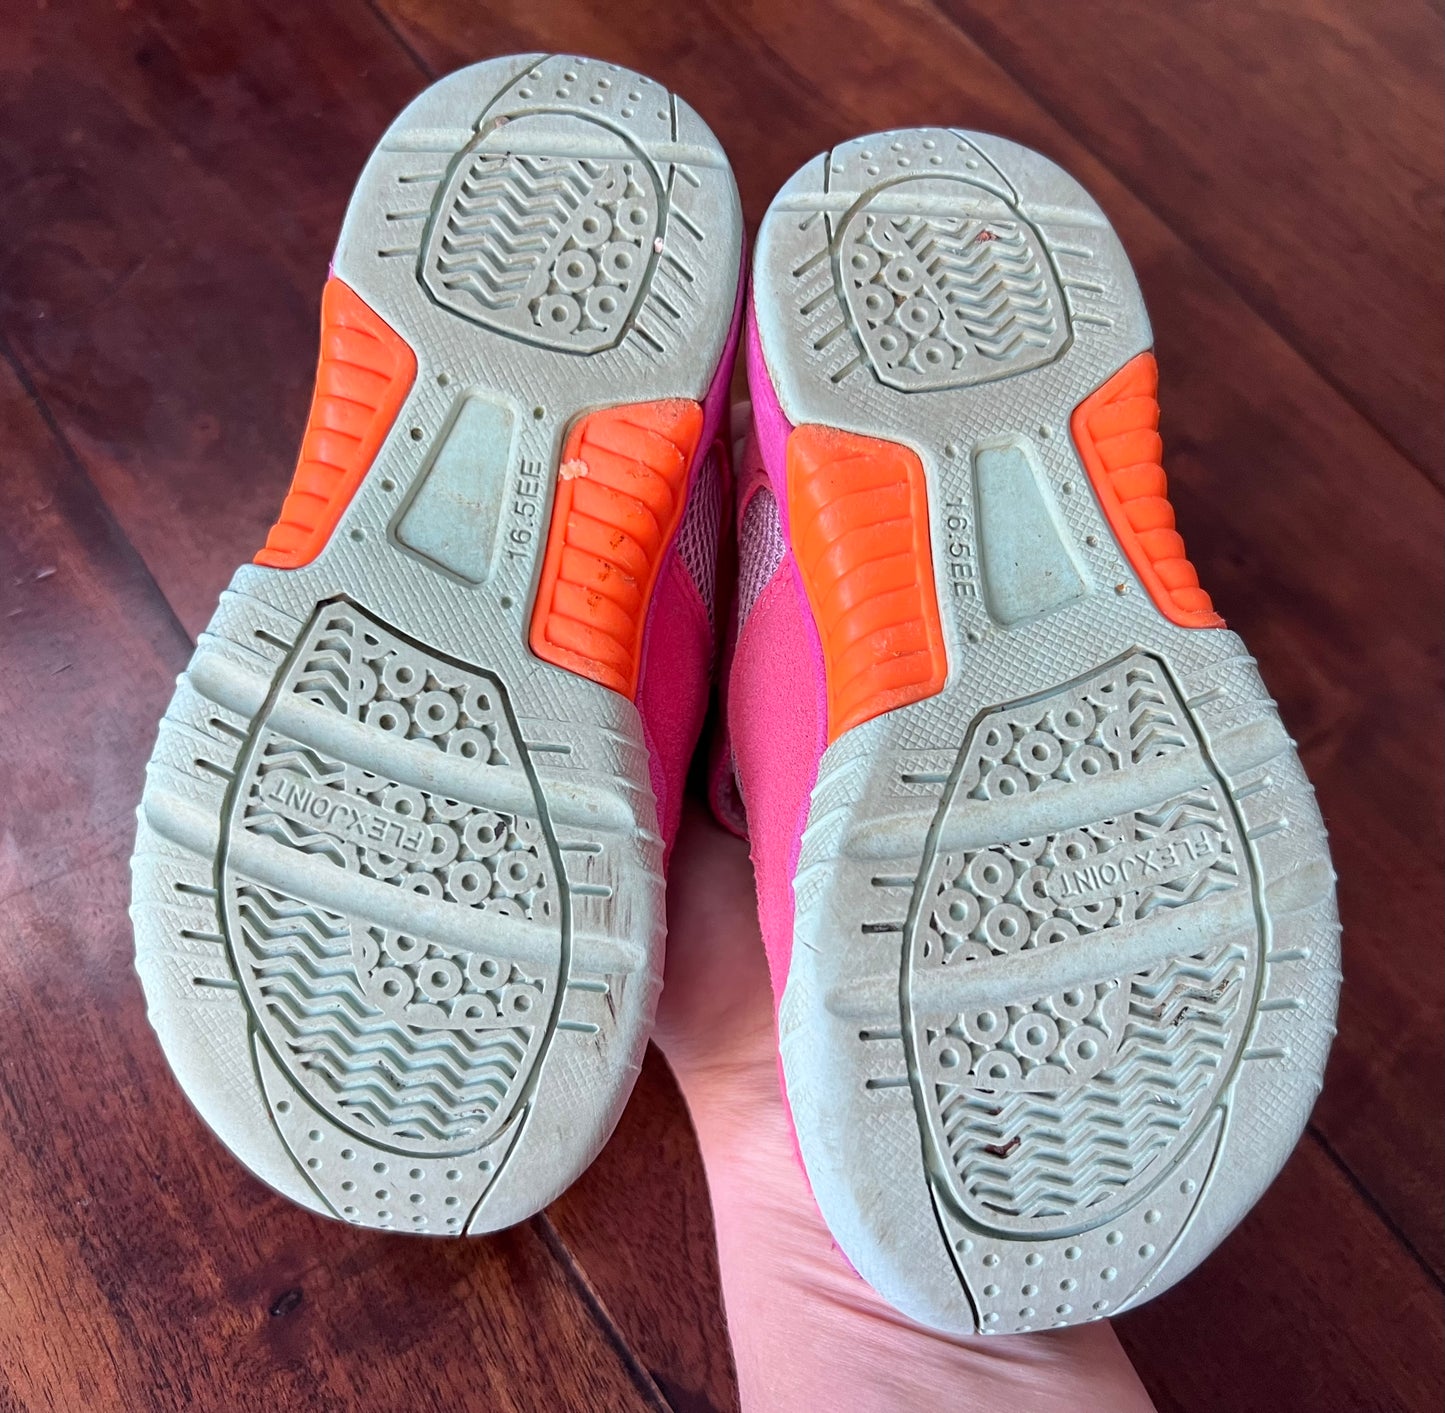 Tsukihoshi pink/teal gym shoe sneakers, machine-washable, velcro closure, easy on & off. VGUC. Lightweight, flexible soles, quick-dry. Toddler girl, size 9.